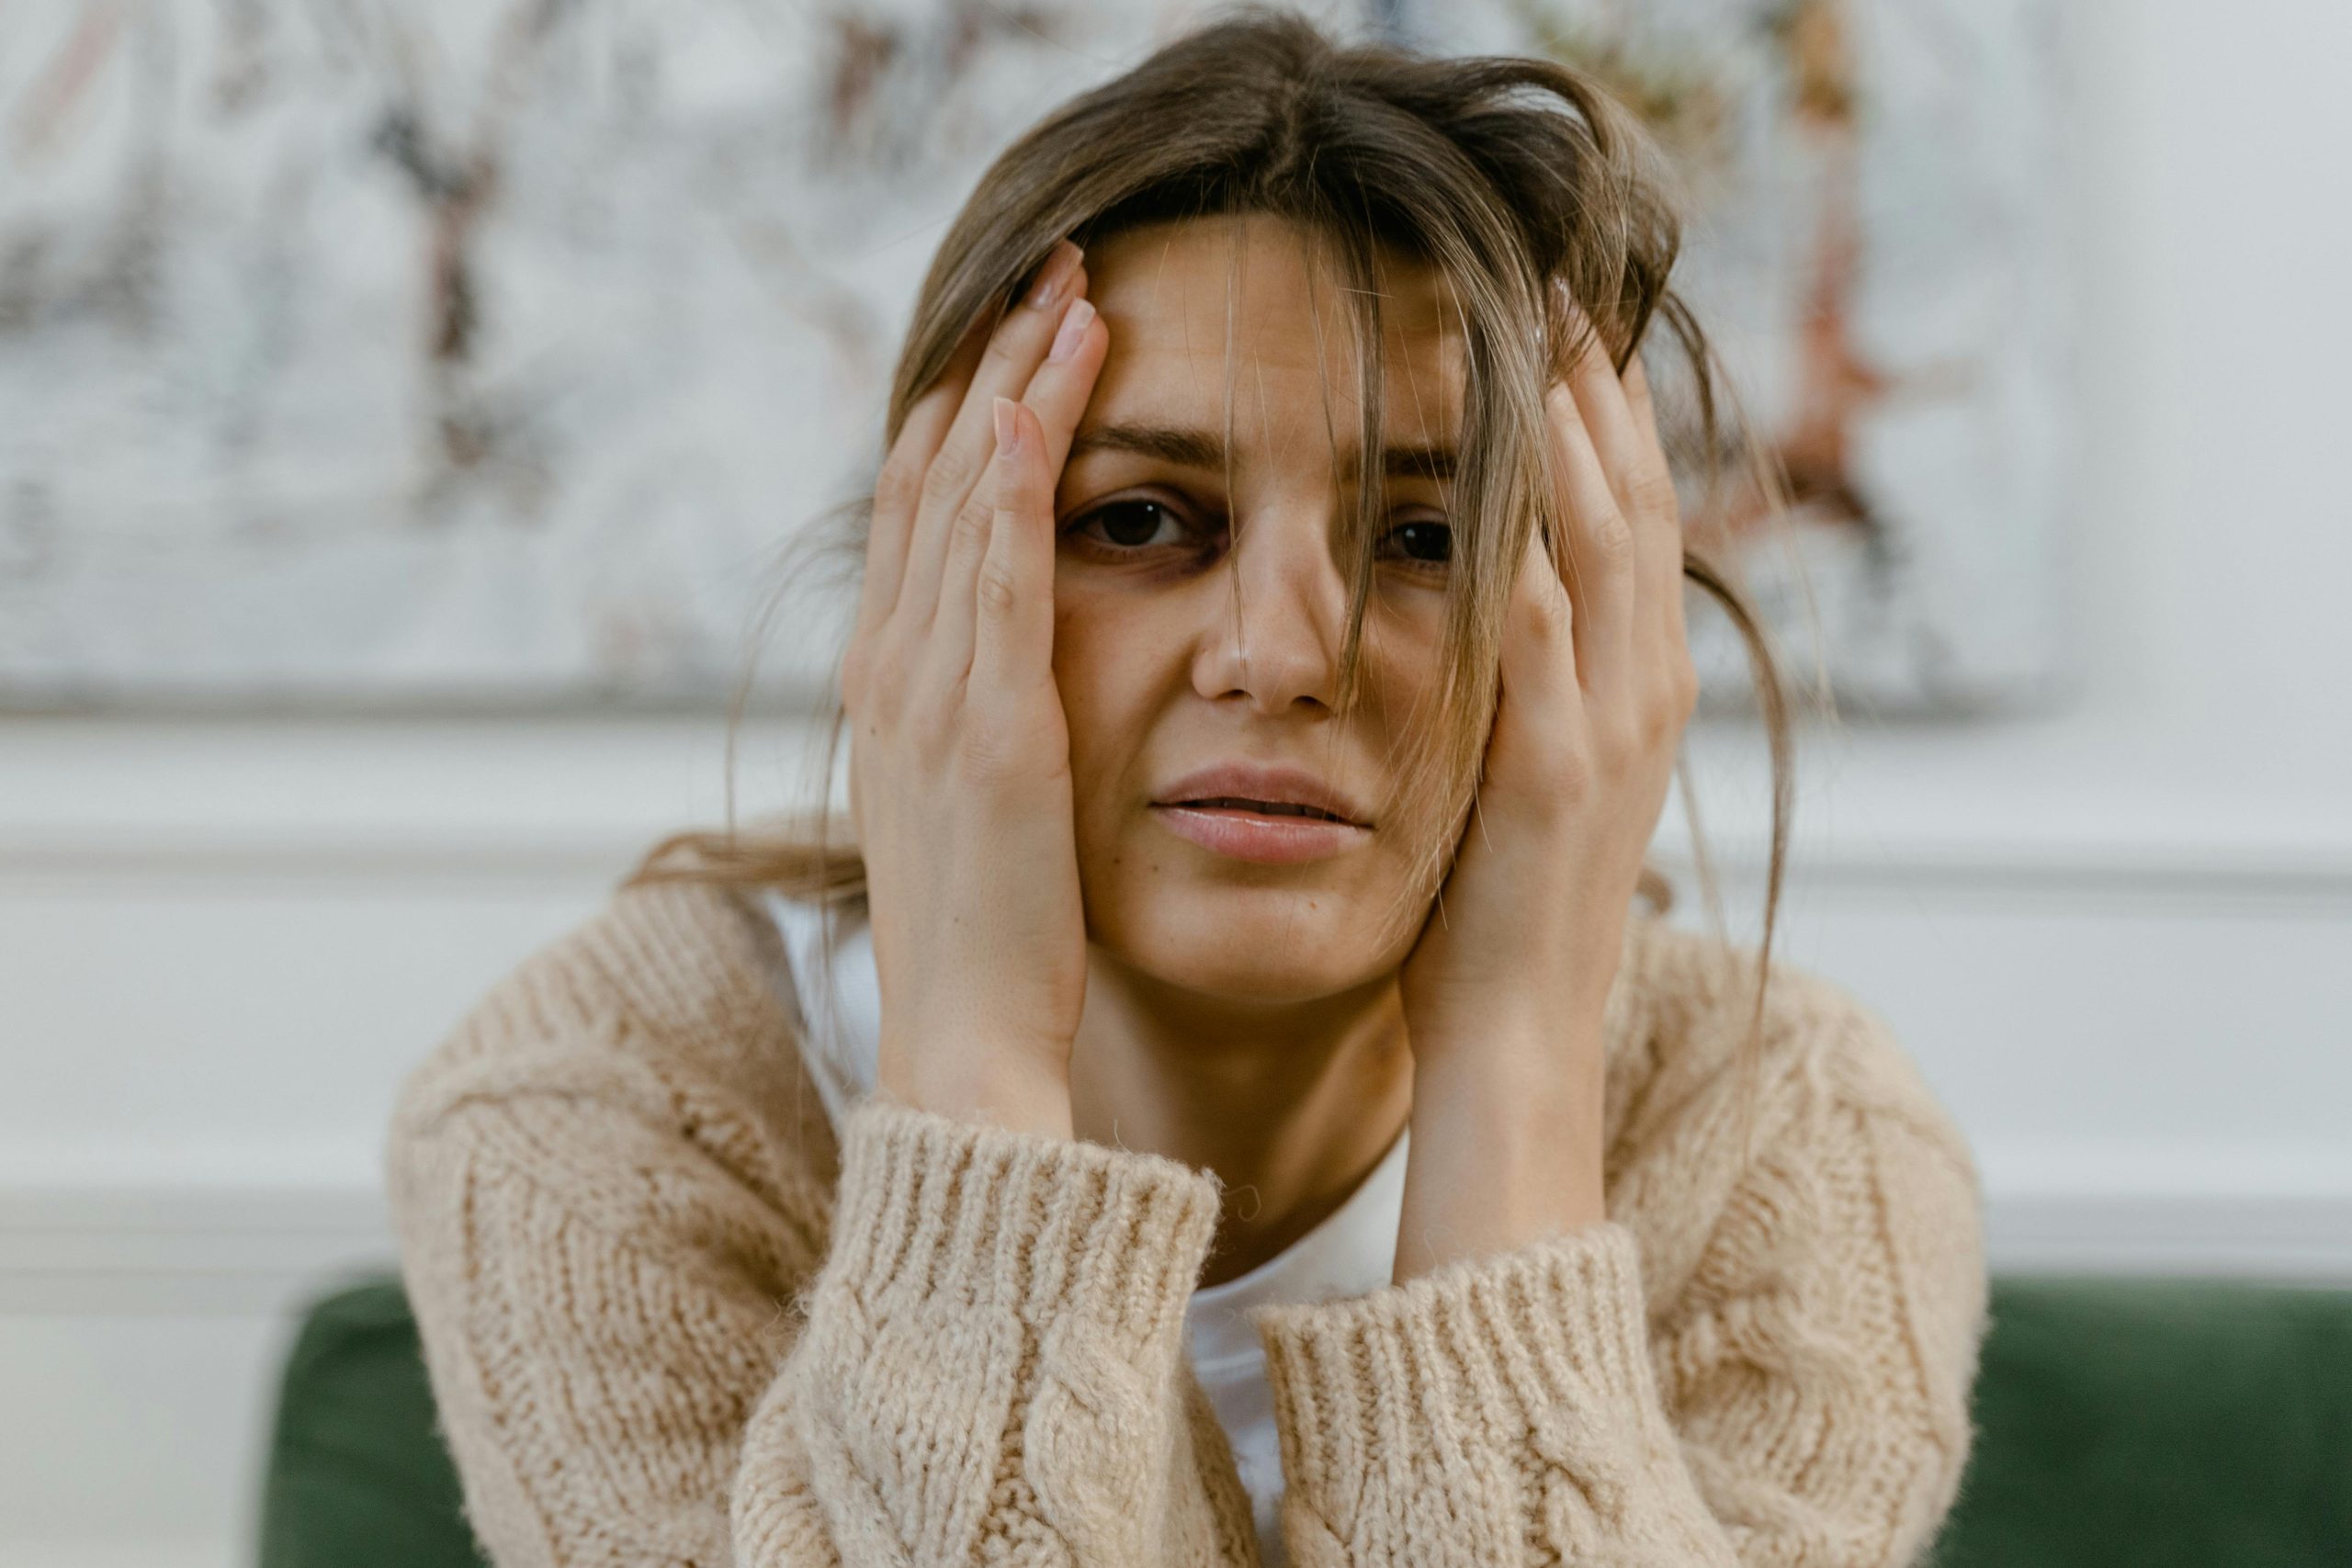 How to Bounce Back From a Traumatic Tough Time